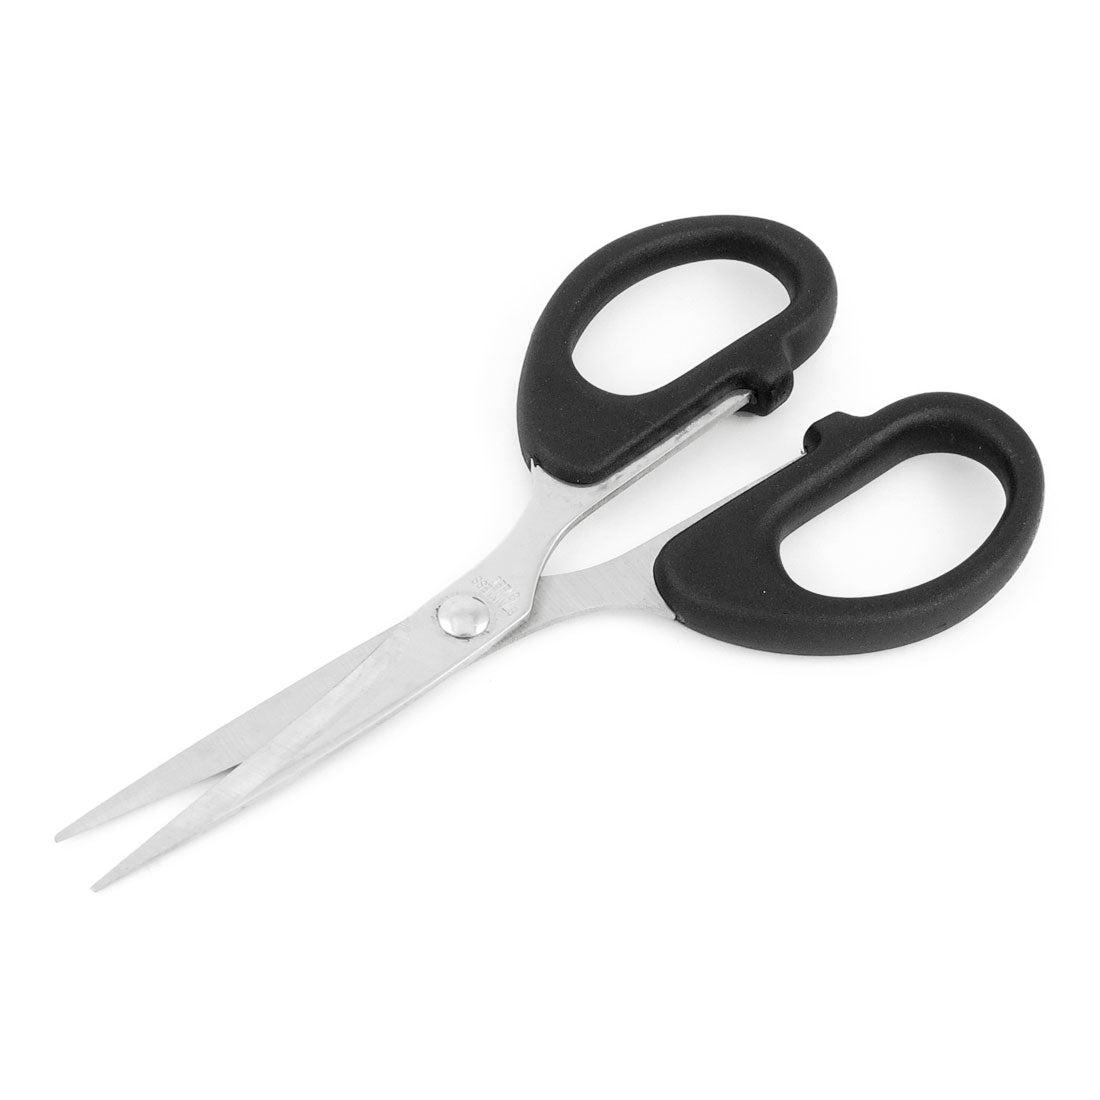 uxcell Uxcell Black Office Stainless Steel Blade Nonslip Grip Sewing Paper Straight Scissor